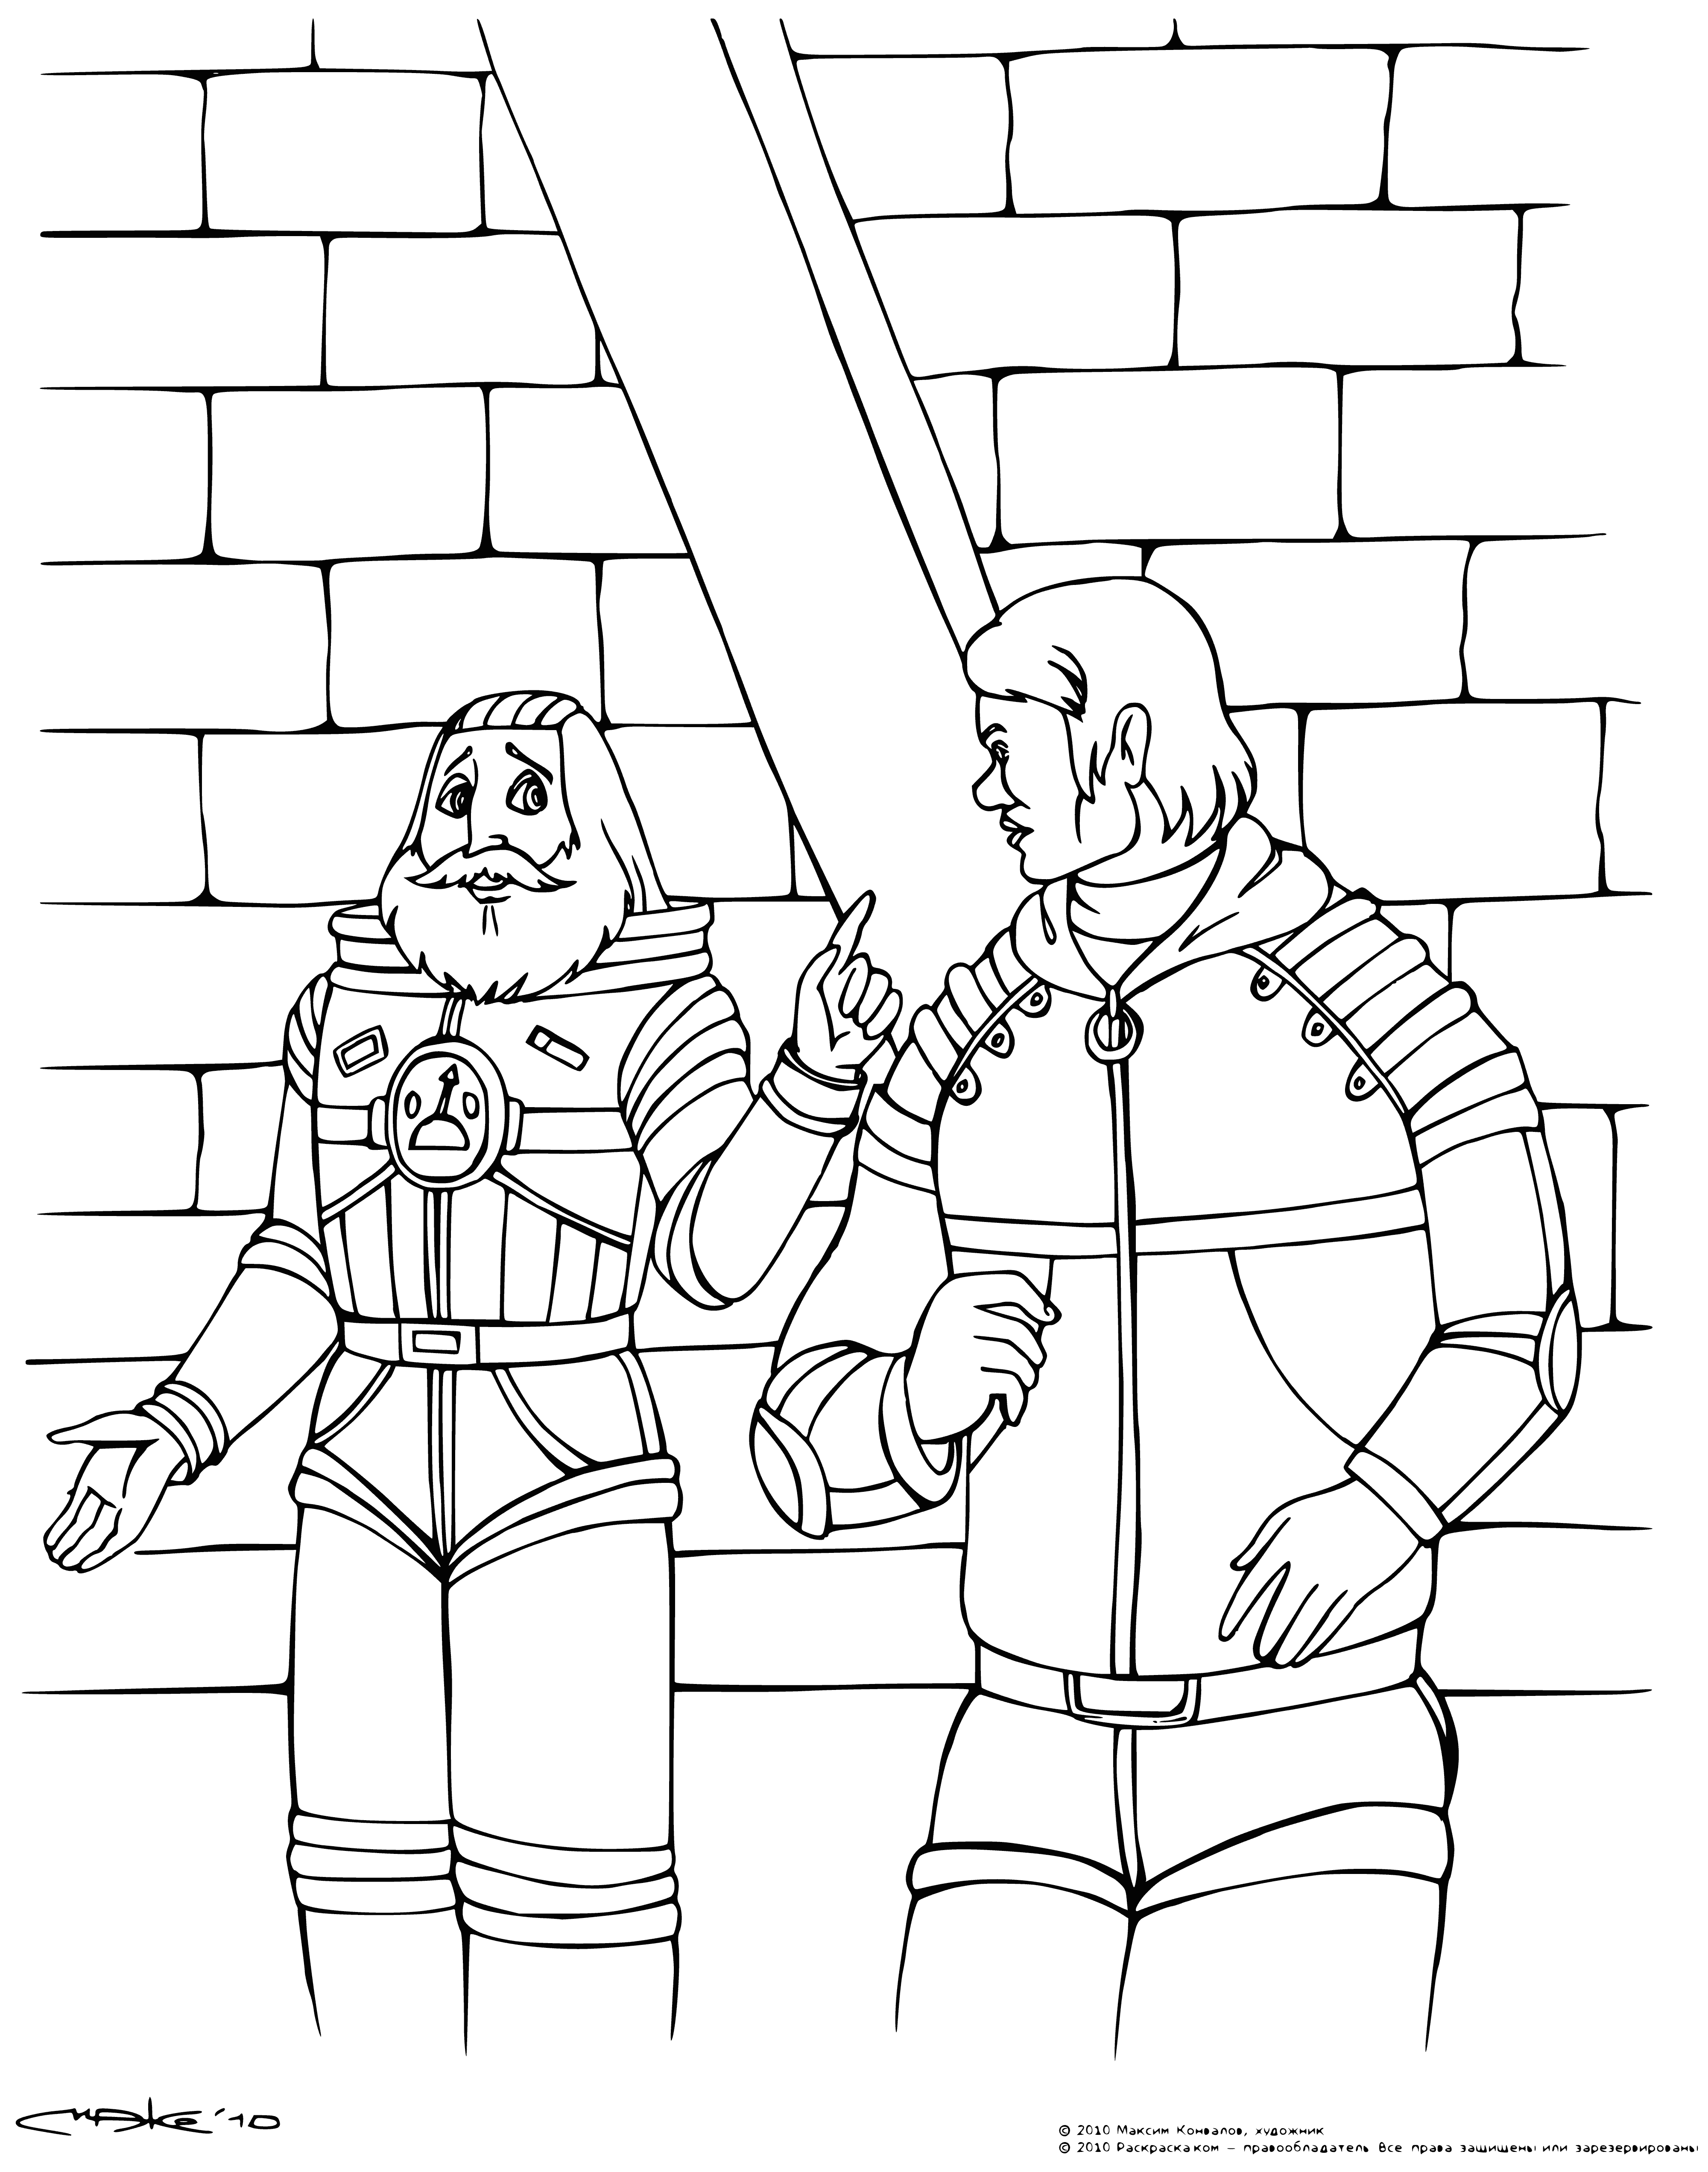 coloring page: Two captains in military uniforms face off against each other, behind ships in a red-skied planet. A tense standoff! #space #military.